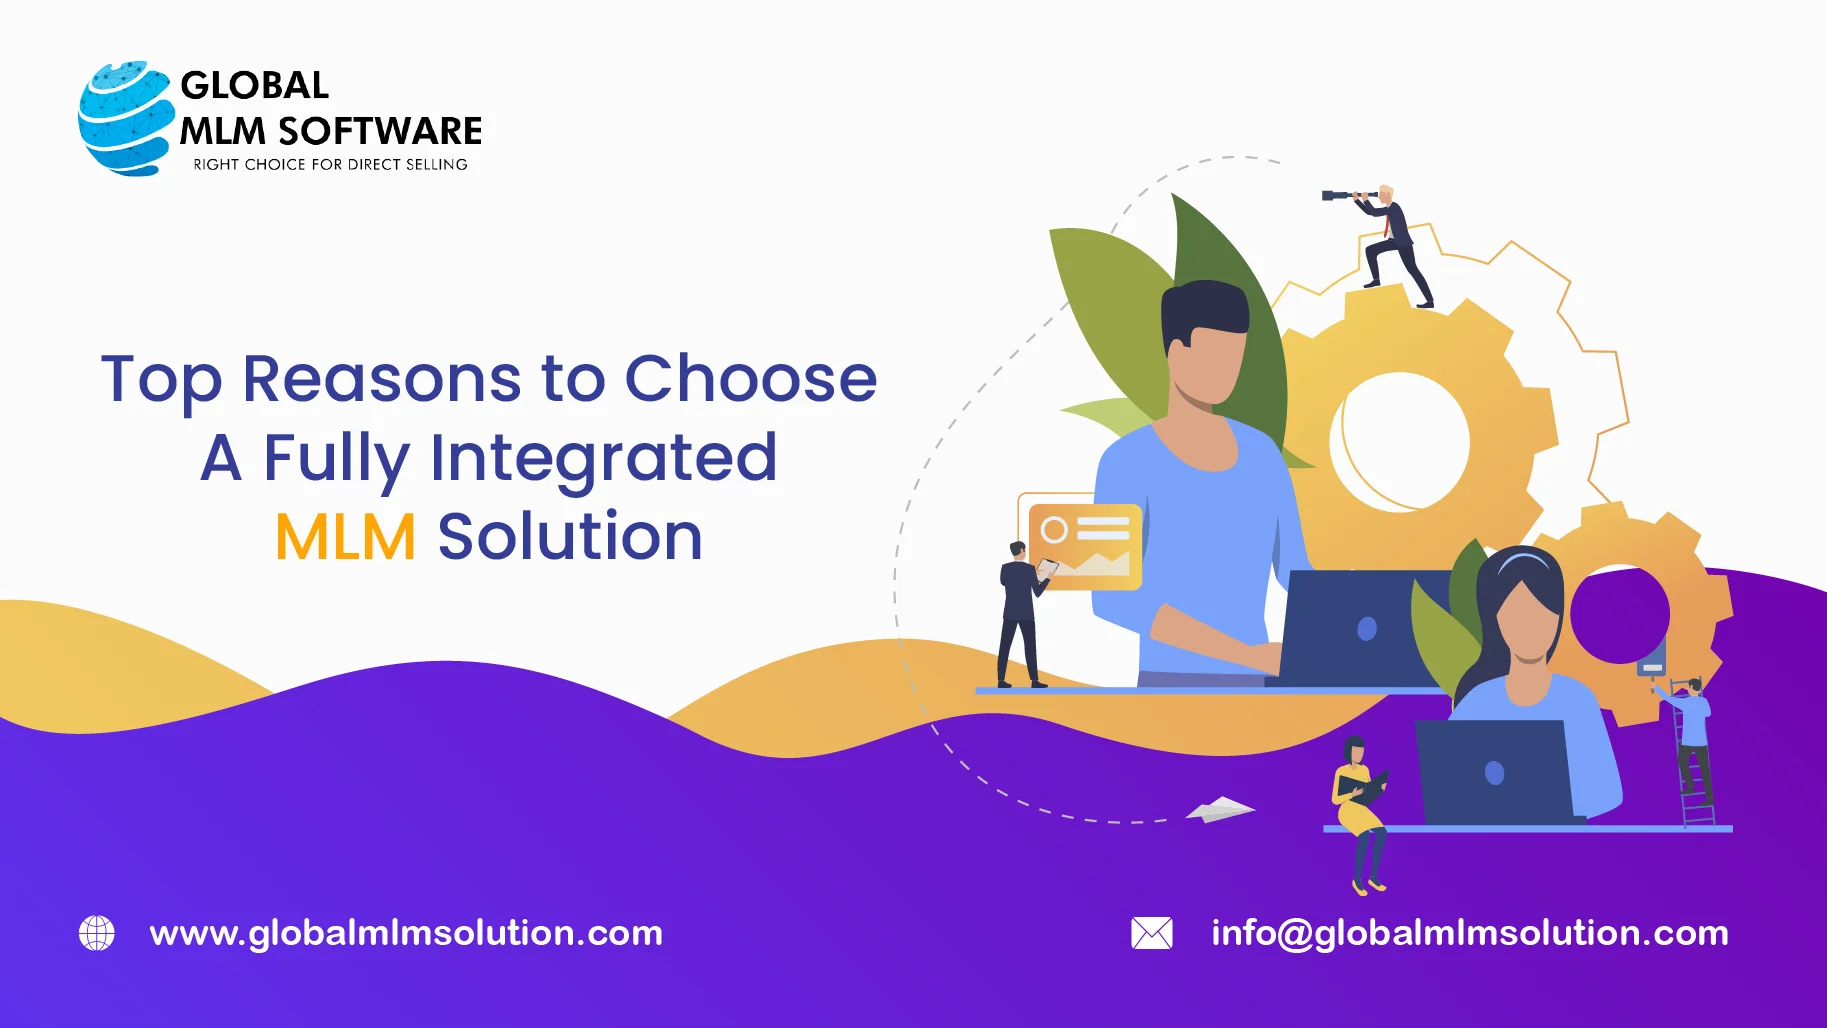 Why You Should Consider a Fully Integrated MLM Solution